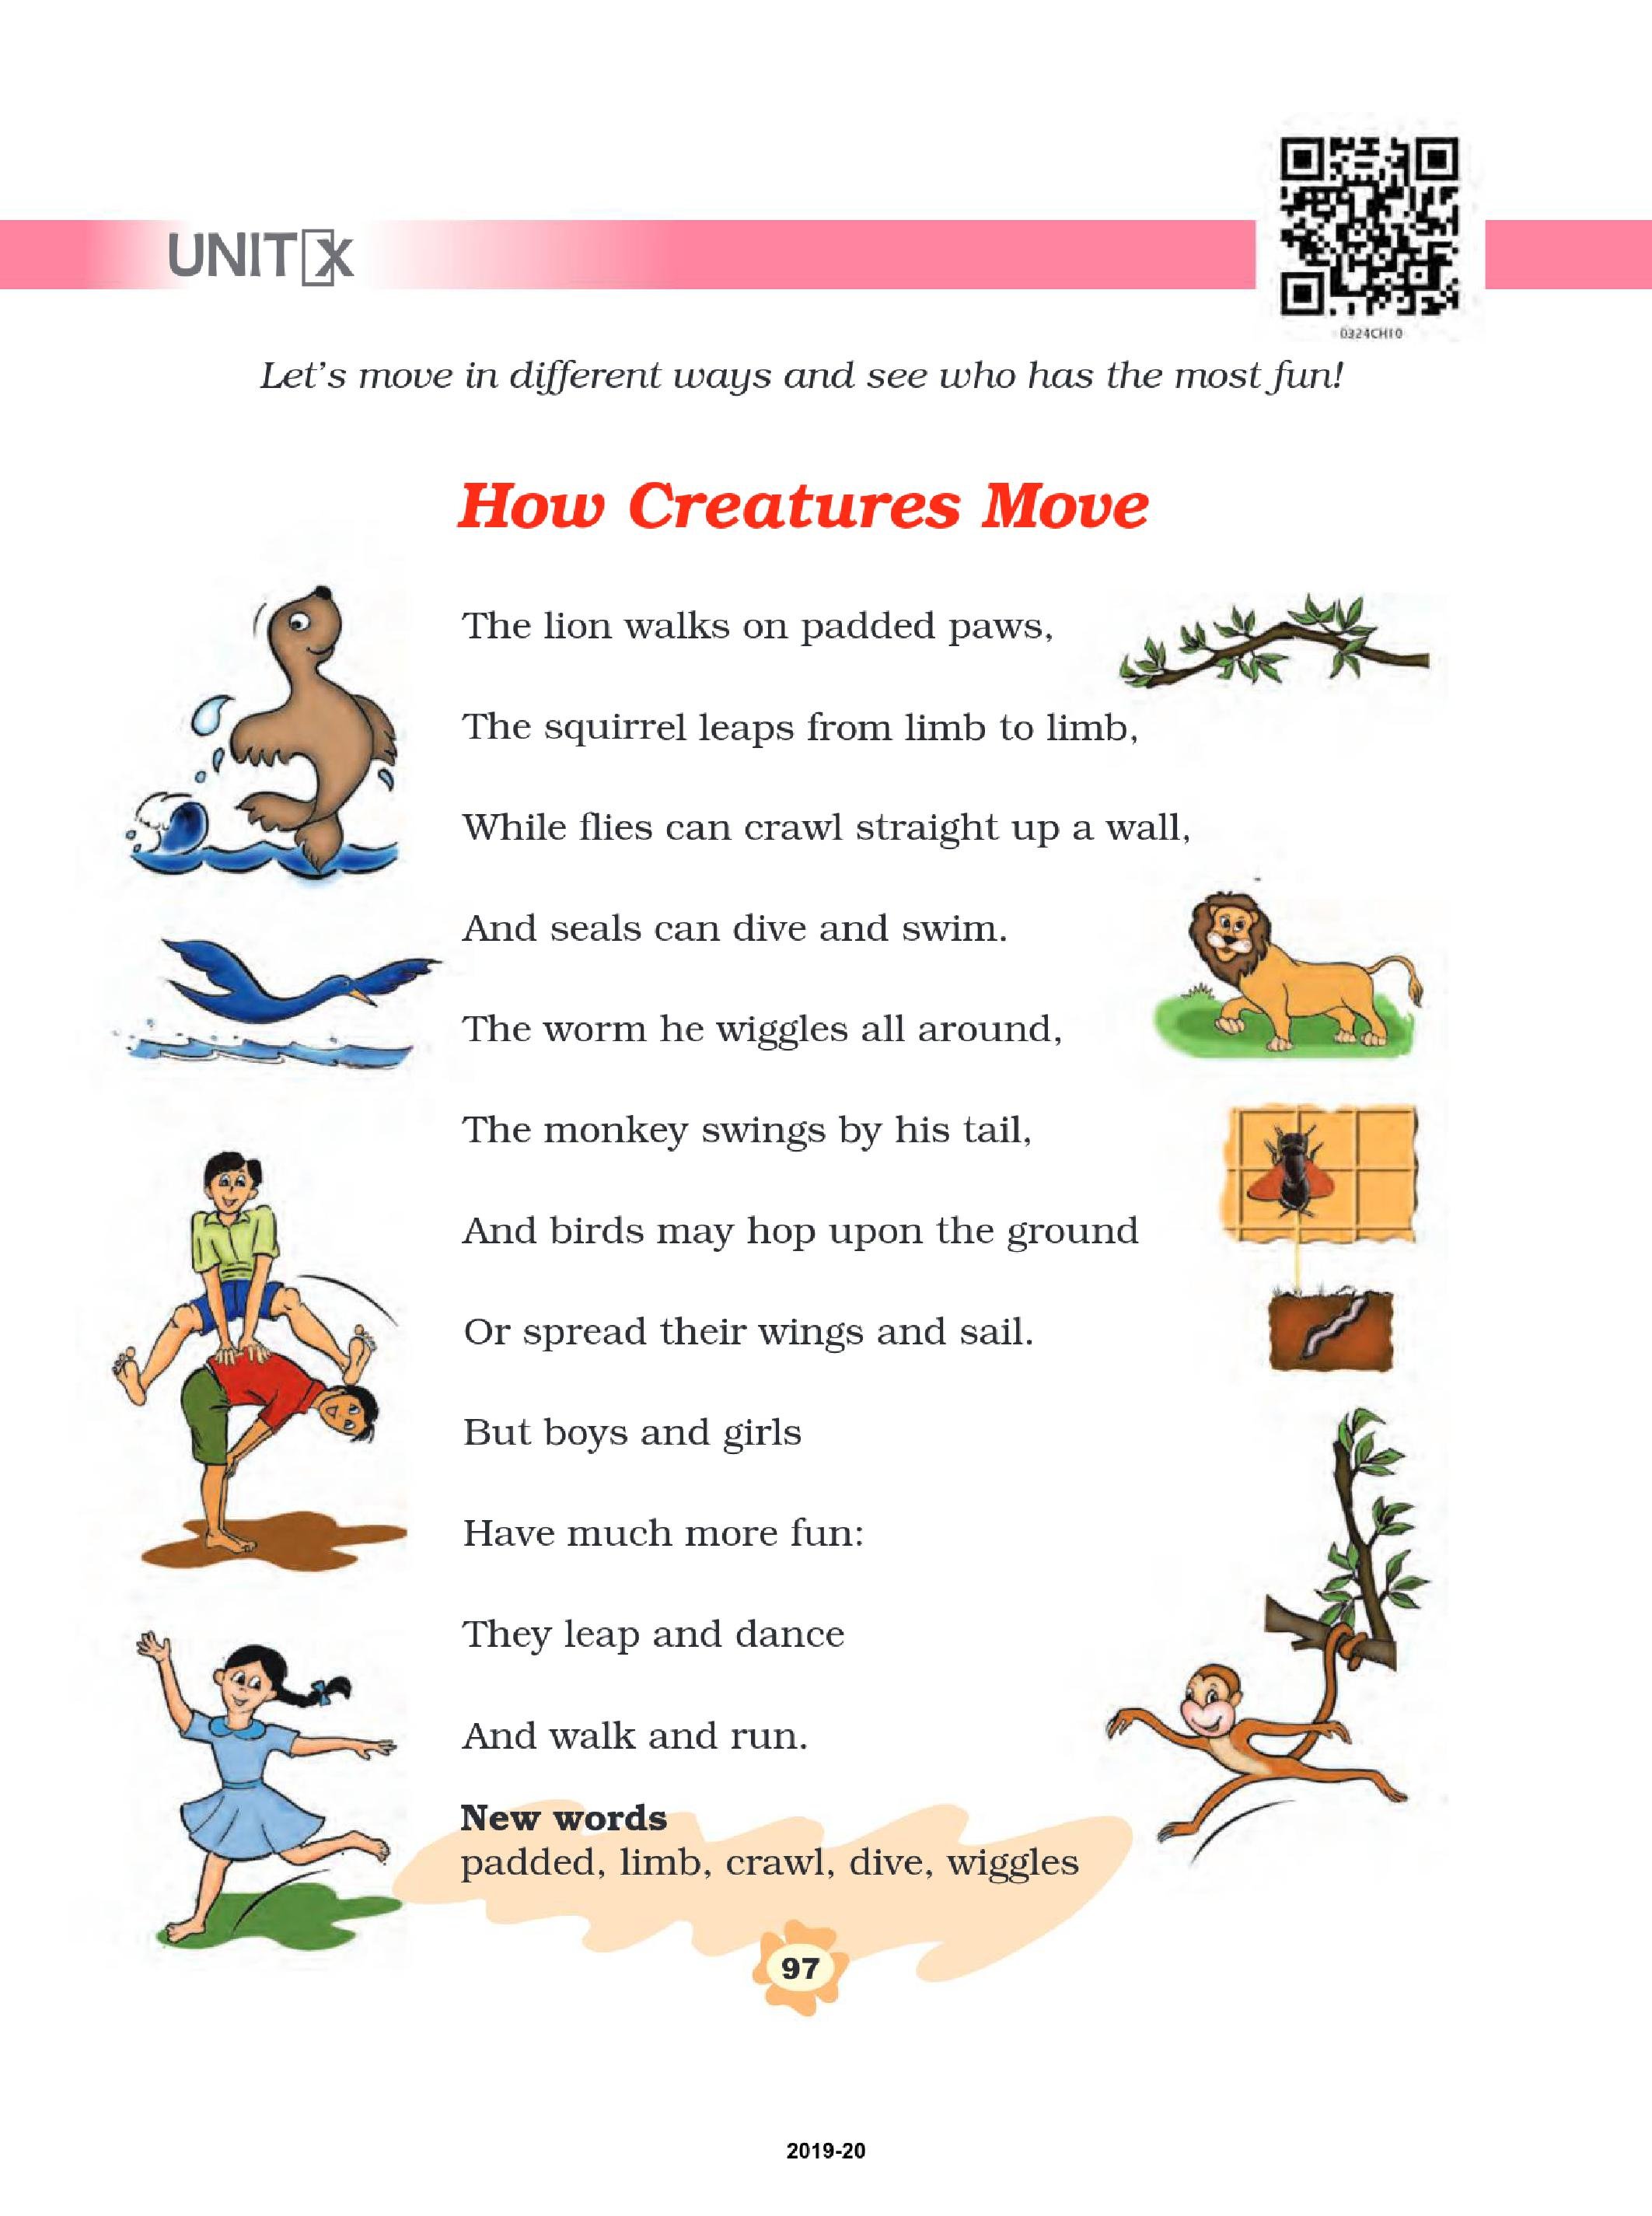 NCERT Book Class 3 English (Marigold) Unit 10 How Creatures Move; The Ship of the Desert - Page 1